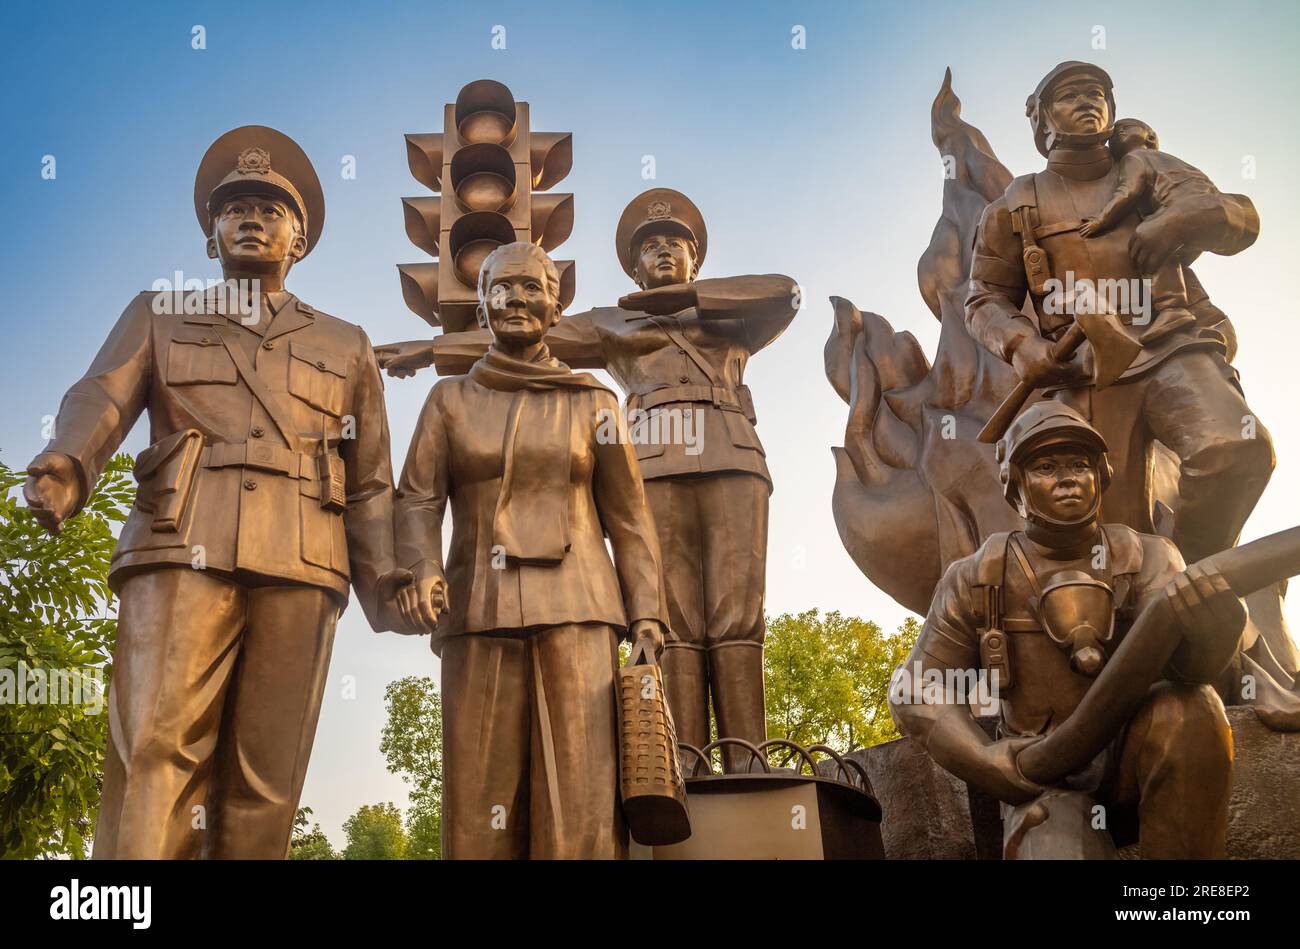 The giant Hanoi Police Force Monument outside the central Reunification Park in Hanoi, Vietnam. The monument, which shows a large traffic light, a pol Stock Photo